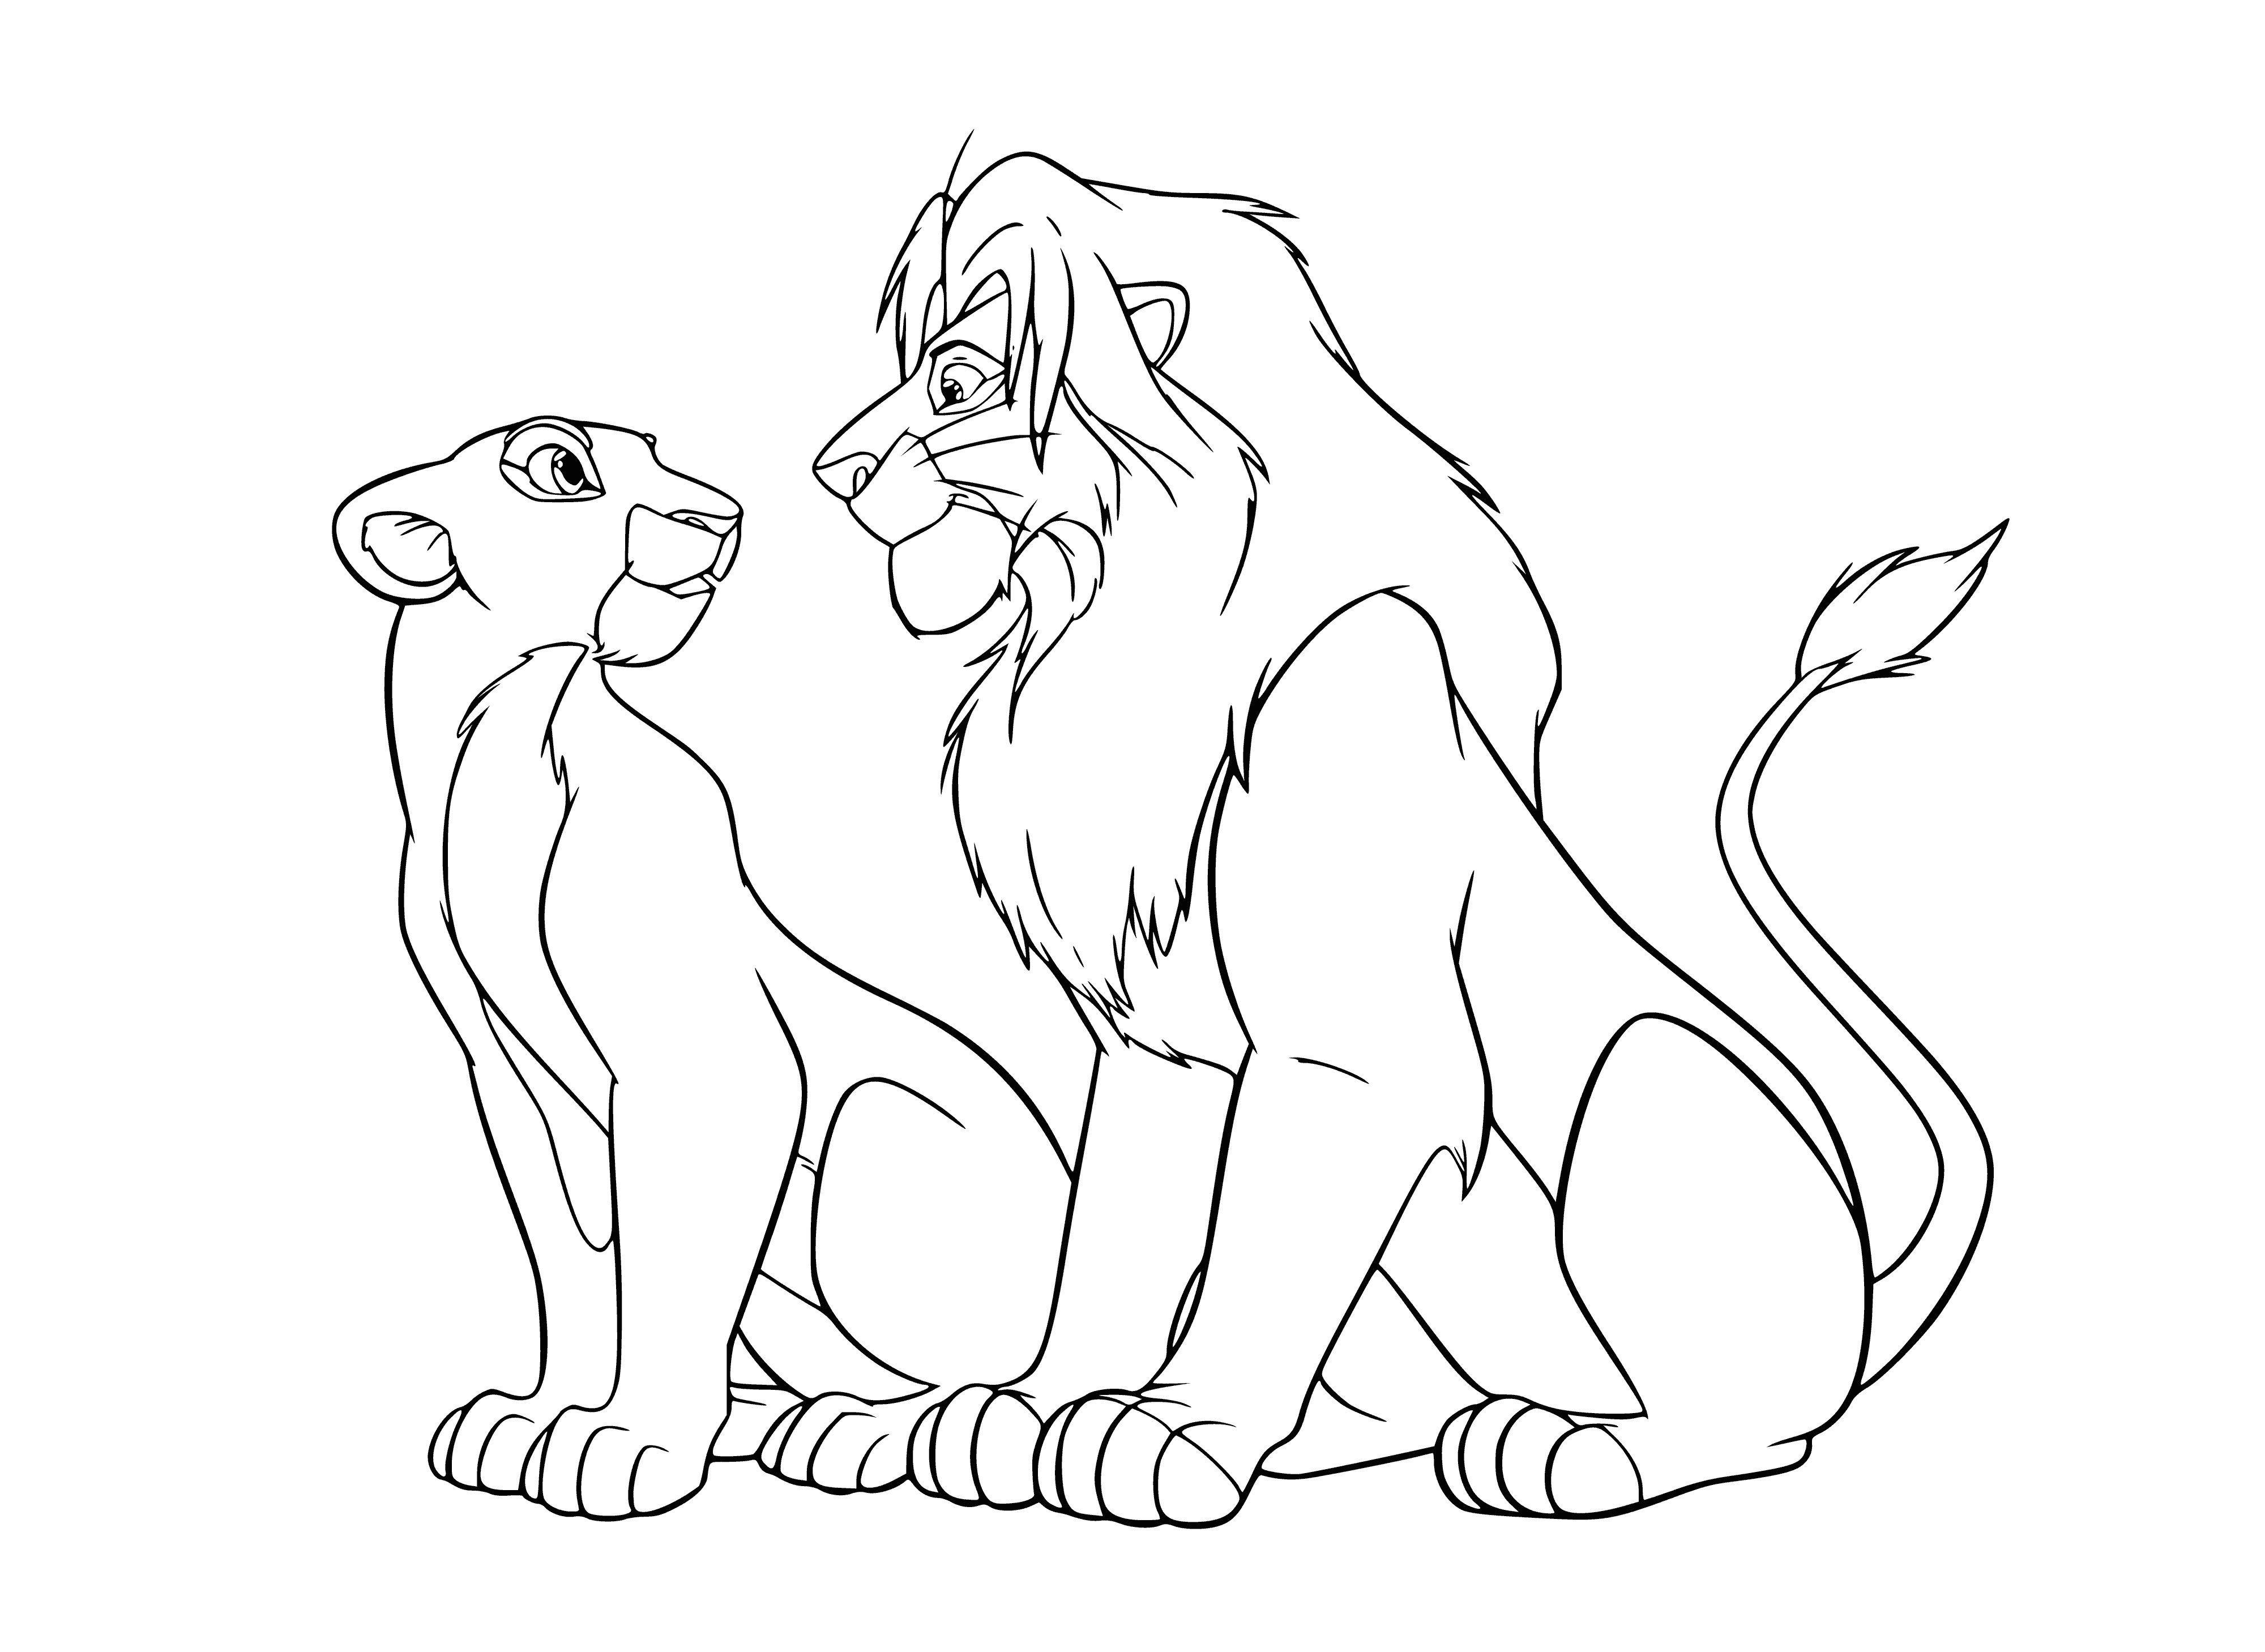 coloring page: Two lions, one lying down and one standing with its paw on the other's chest, face a windy day. #Lions